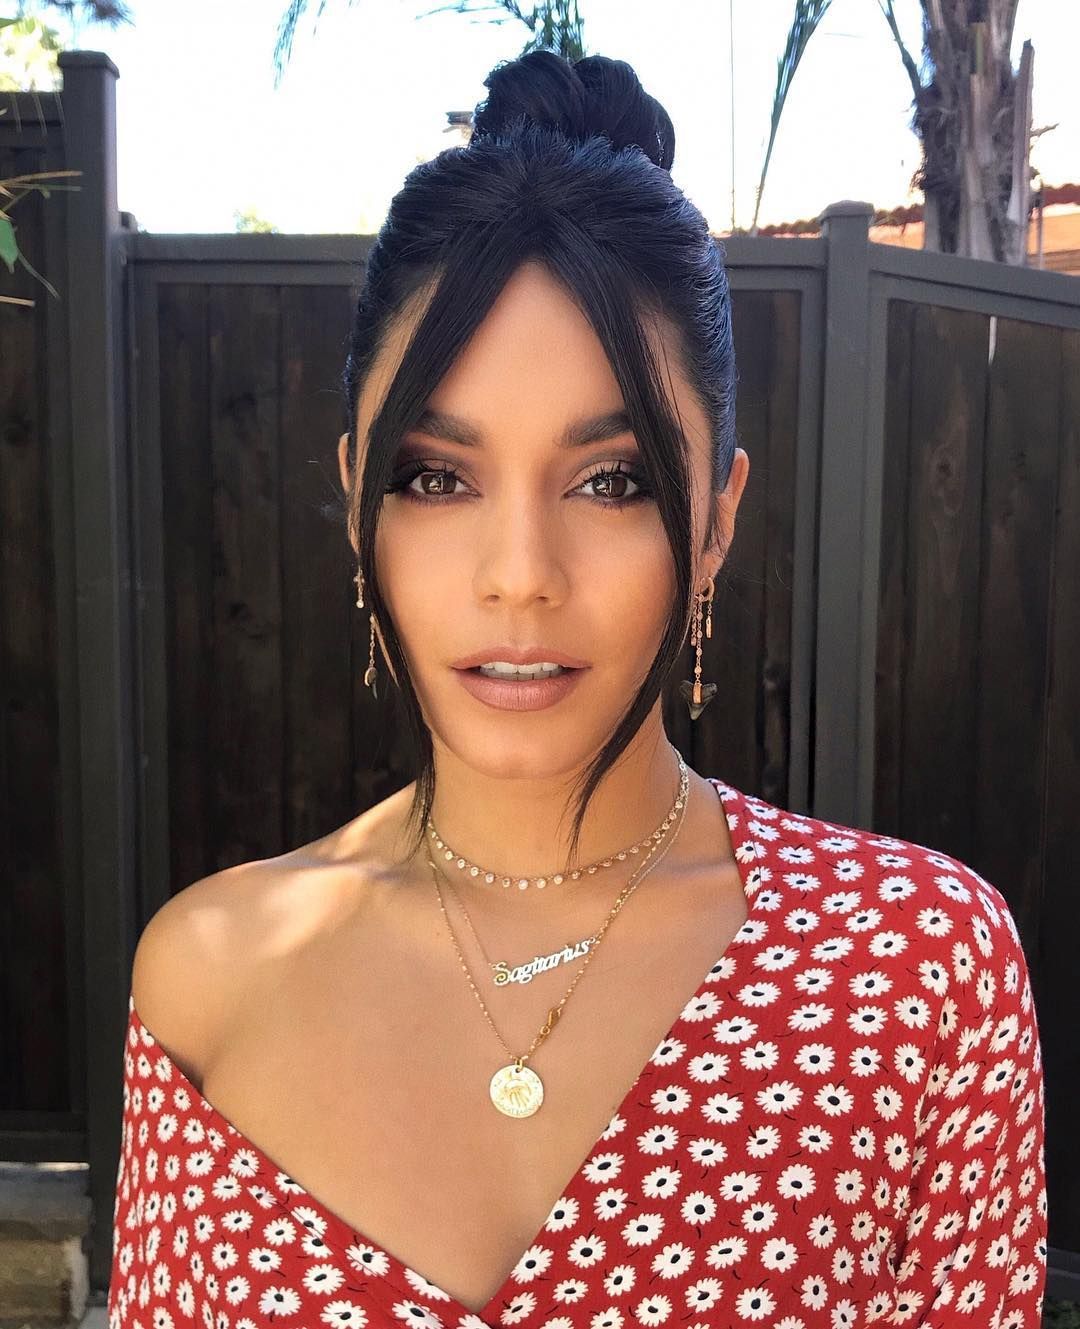 20+ Photos Showing the Beauty of Being Mixed-Race -   22 vanessa hudgens peinados
 ideas